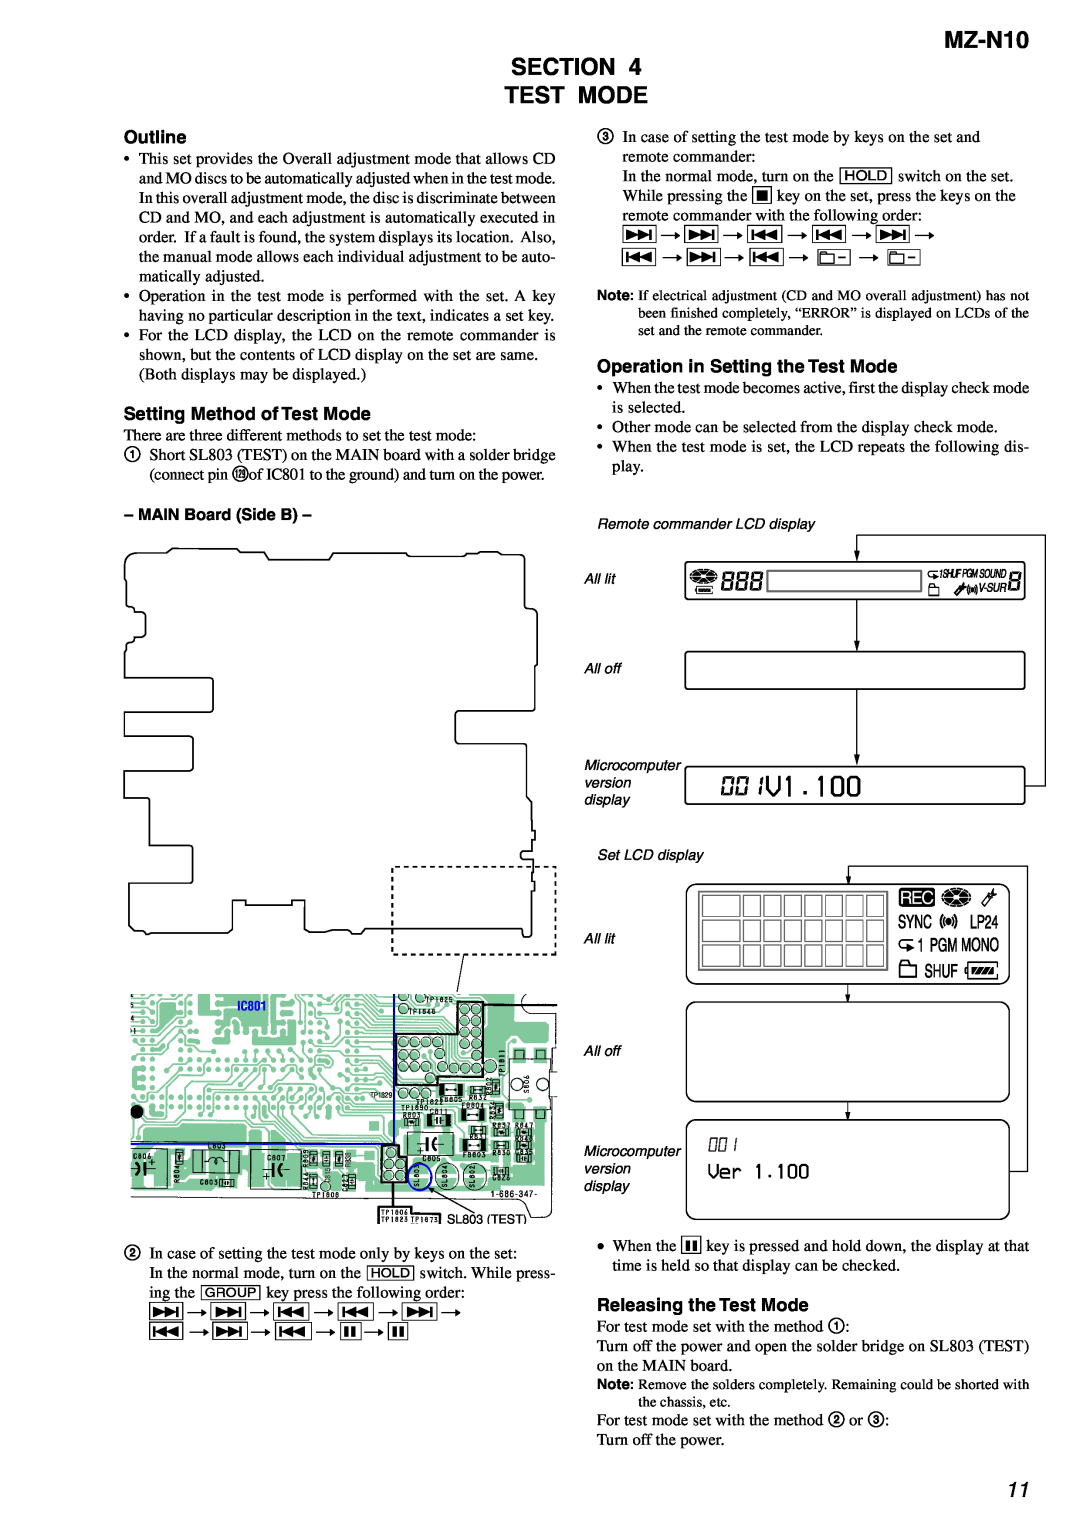 Sony service manual MZ-N10 SECTION TEST MODE, Outline, Setting Method of Test Mode, Operation in Setting the Test Mode 